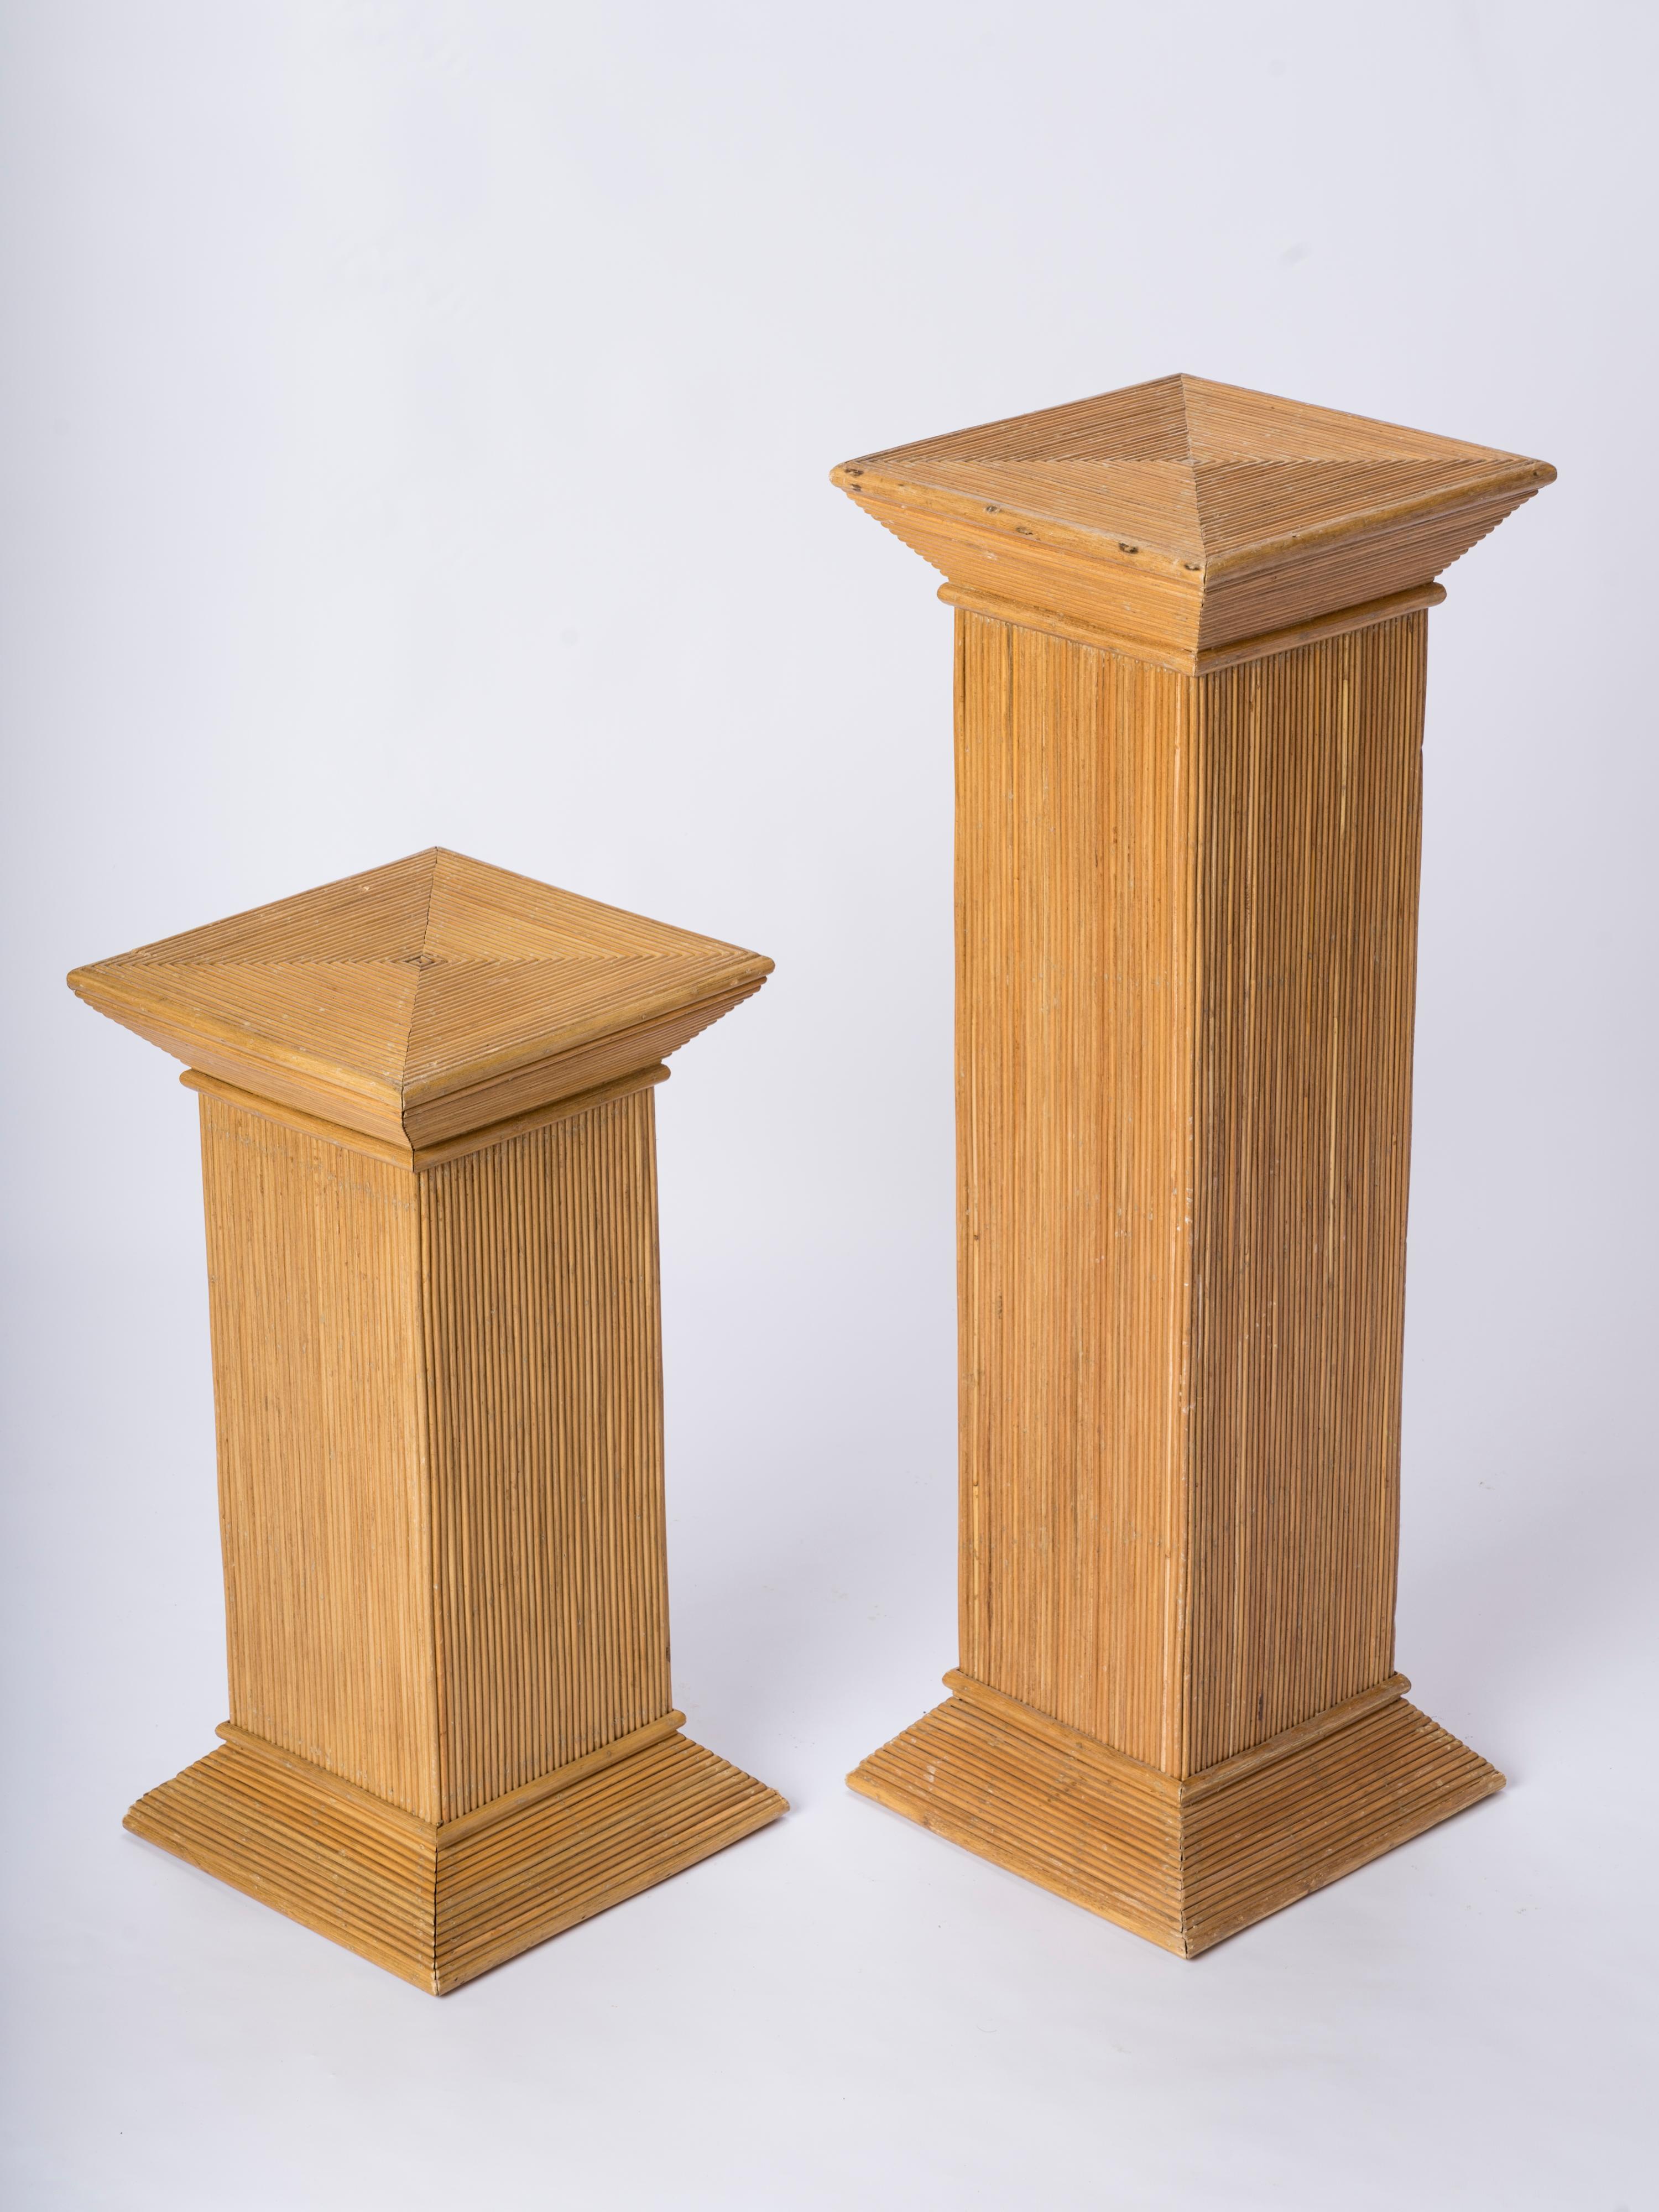 Pair of neo classical rattan marquetry pedestals attributed to Vivai del Sud. Symetrical base and top perspective endings.  In fair condition. Some minor structural damages as shown on pictures. Sturdy.
Dimensions indicated for taller pedestal.